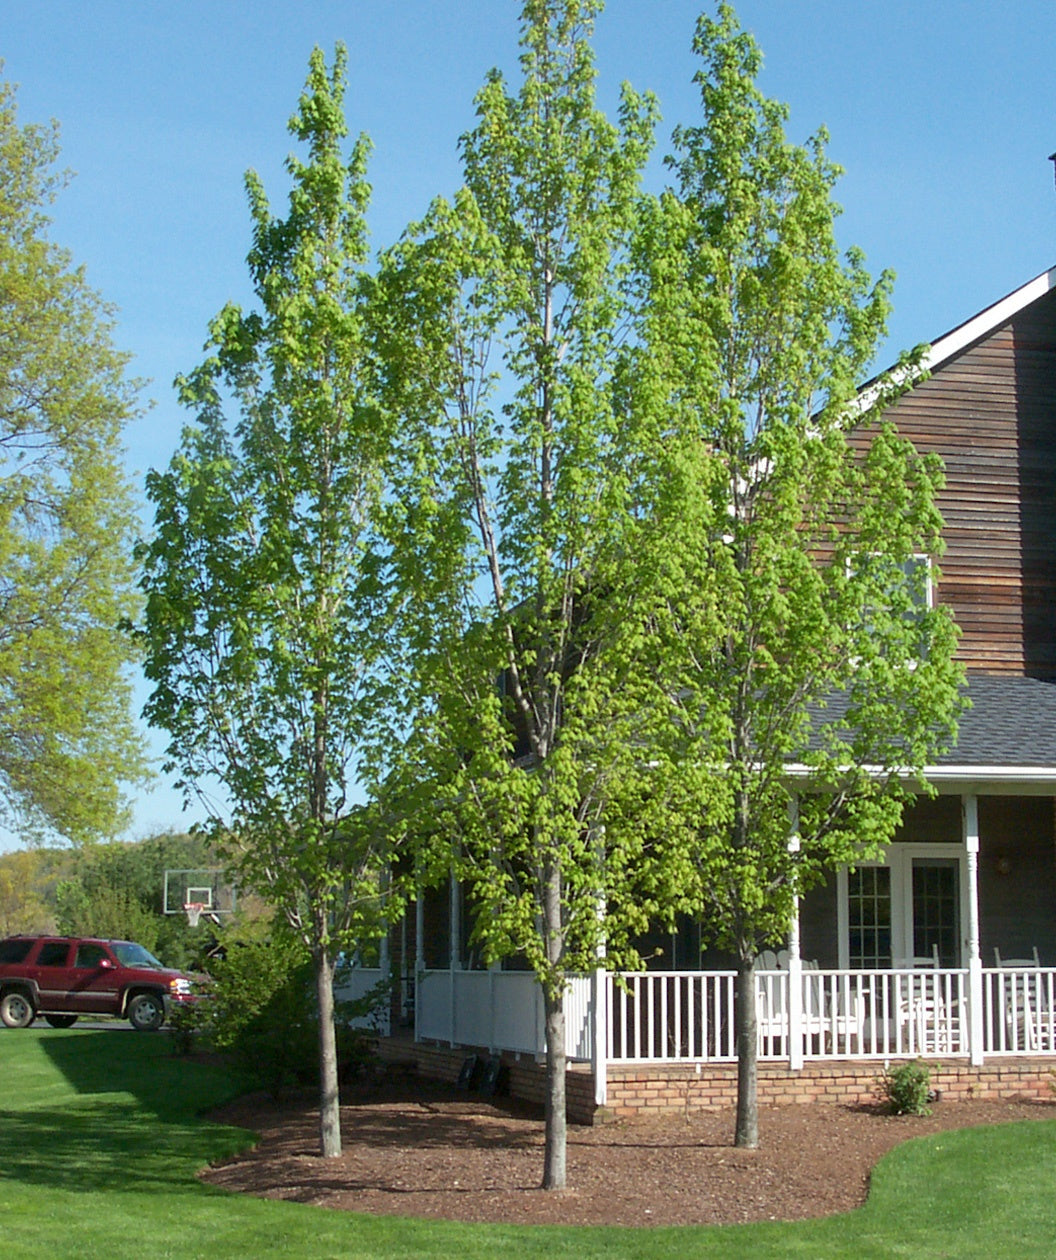 Armstrong Red Maple